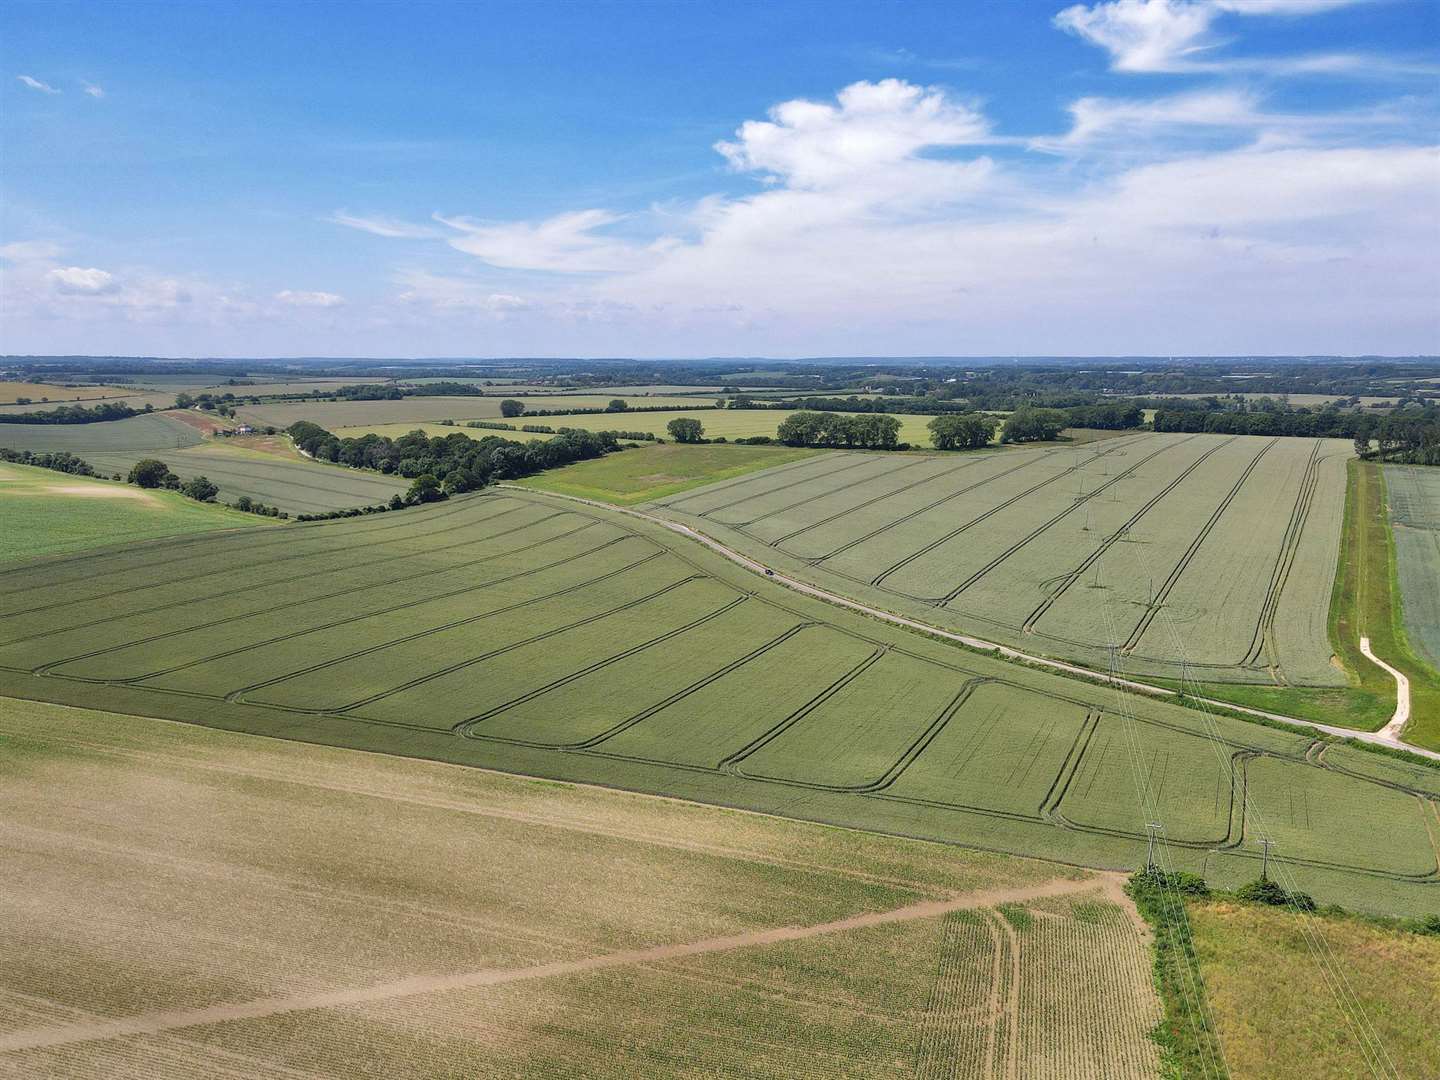 The site covers more than 500 acres Picture: Savills